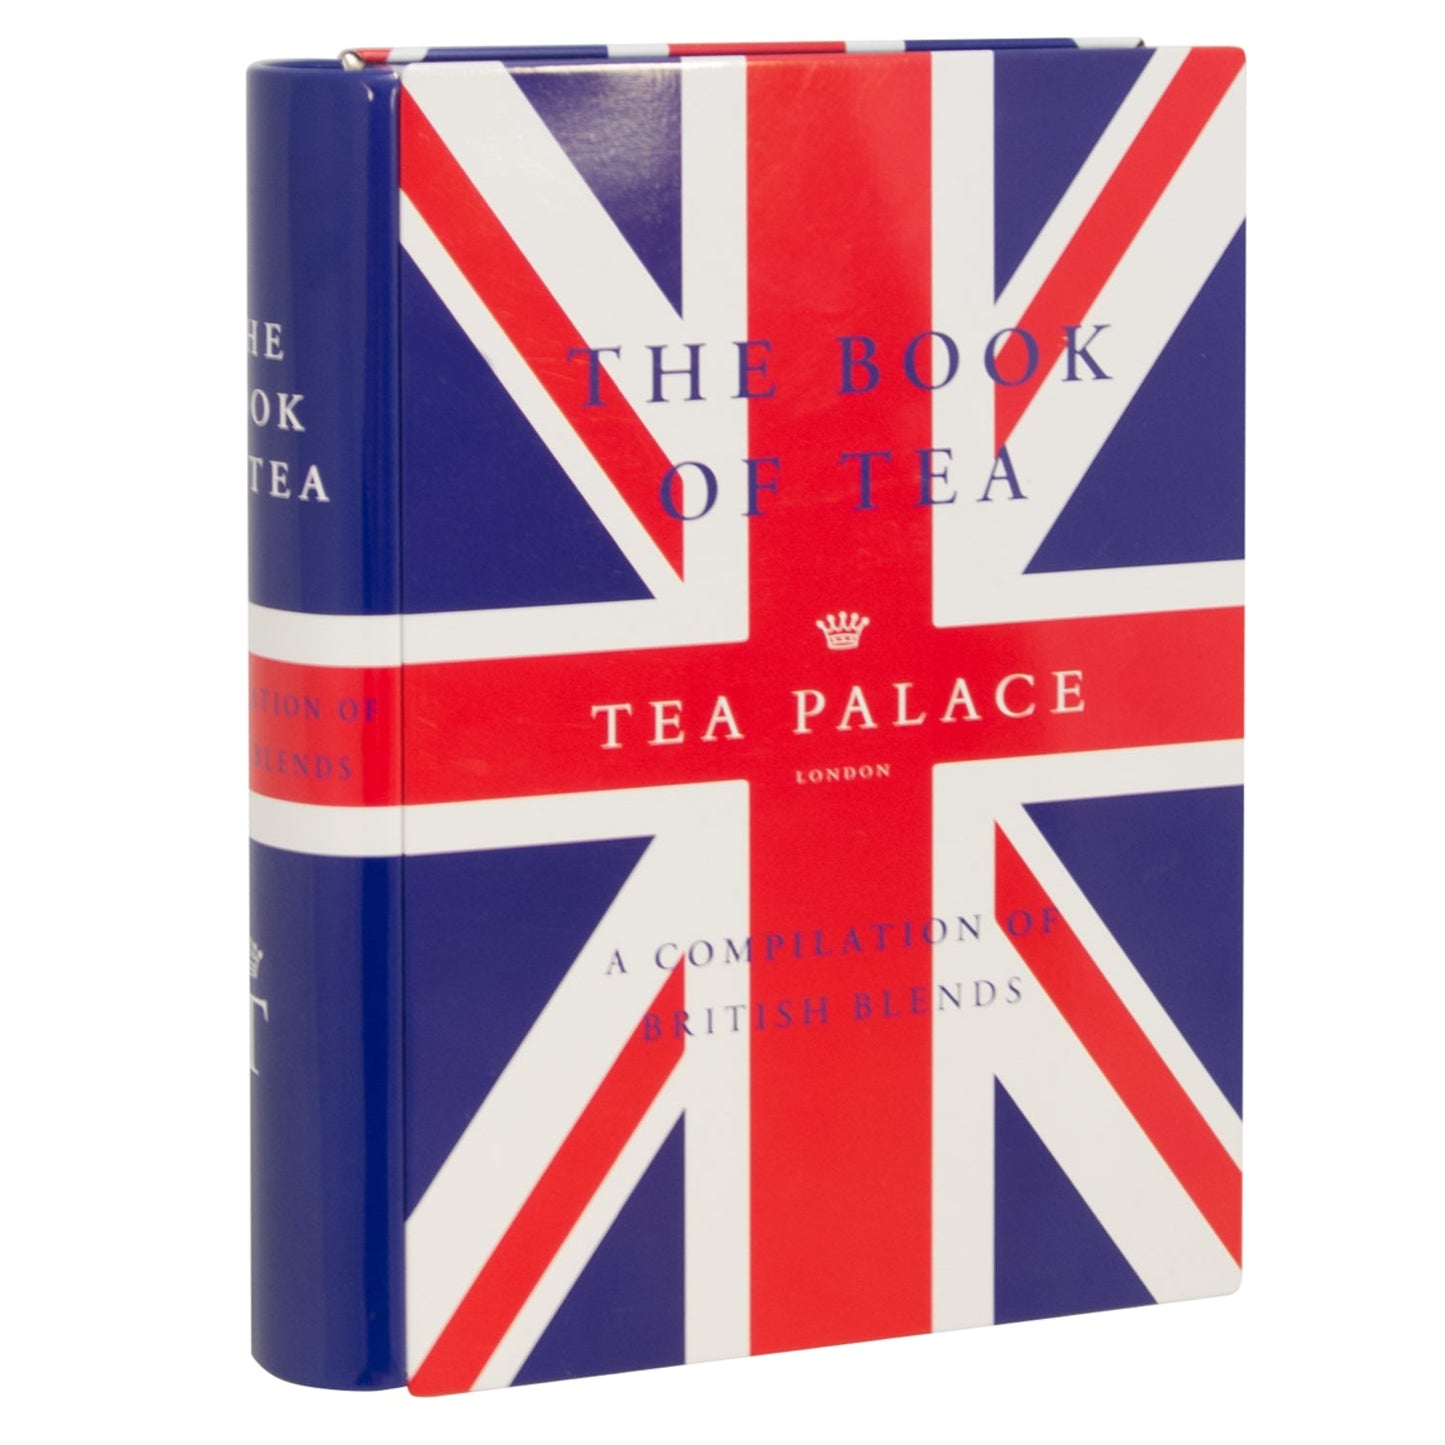 The Book of Tea - British Blends Edition